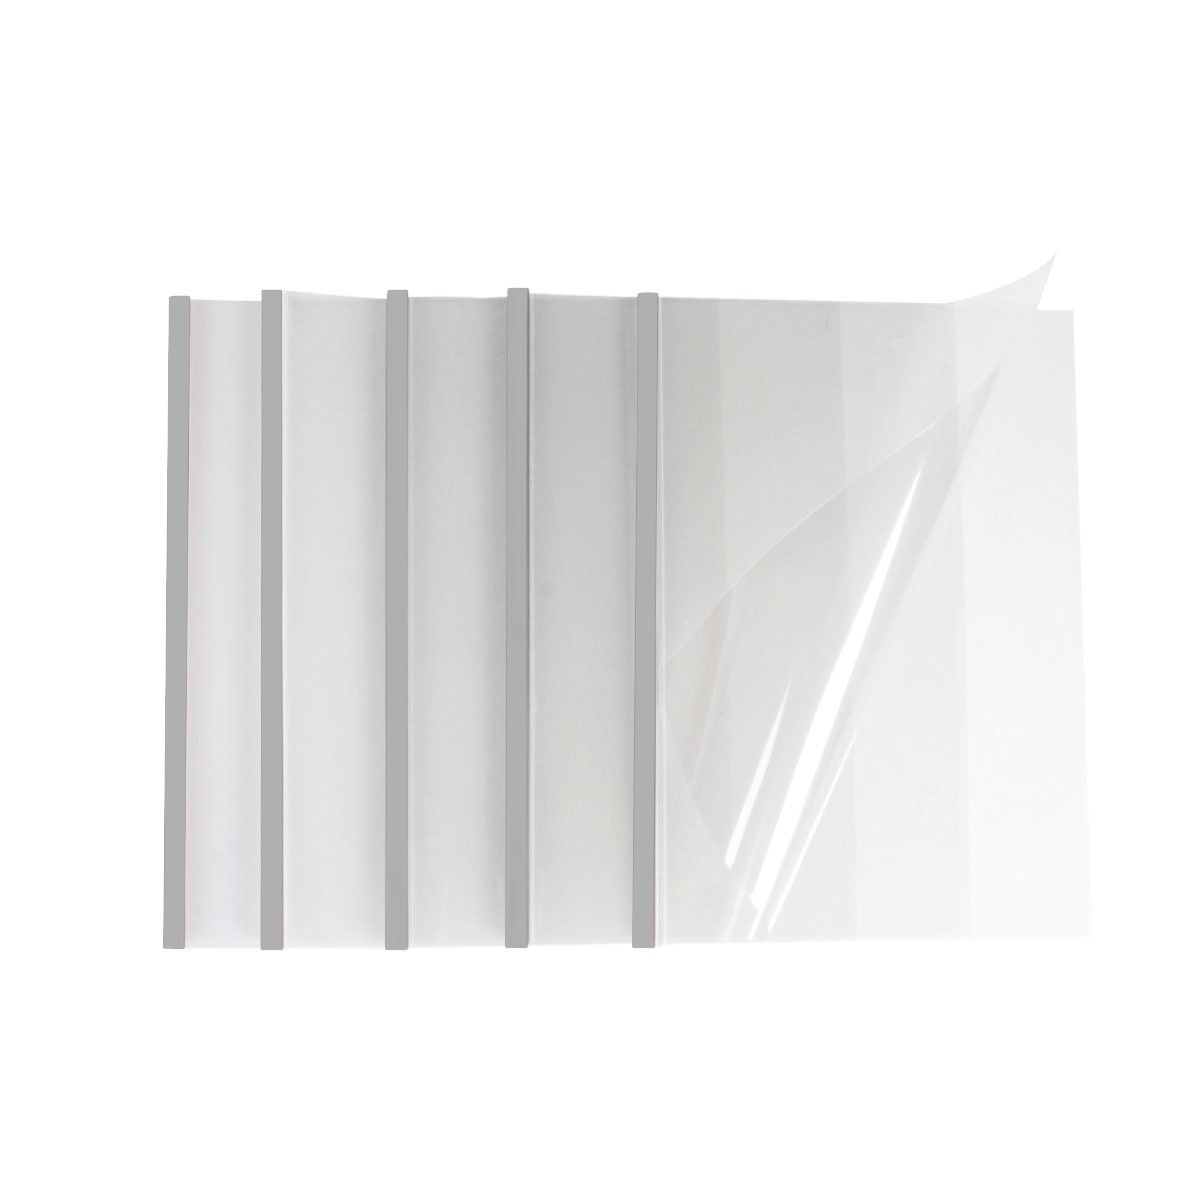 Masterbind Clear EASY Covers [Silver Channel, 60 Sheets Capacity,Size 7] - 40/Bx